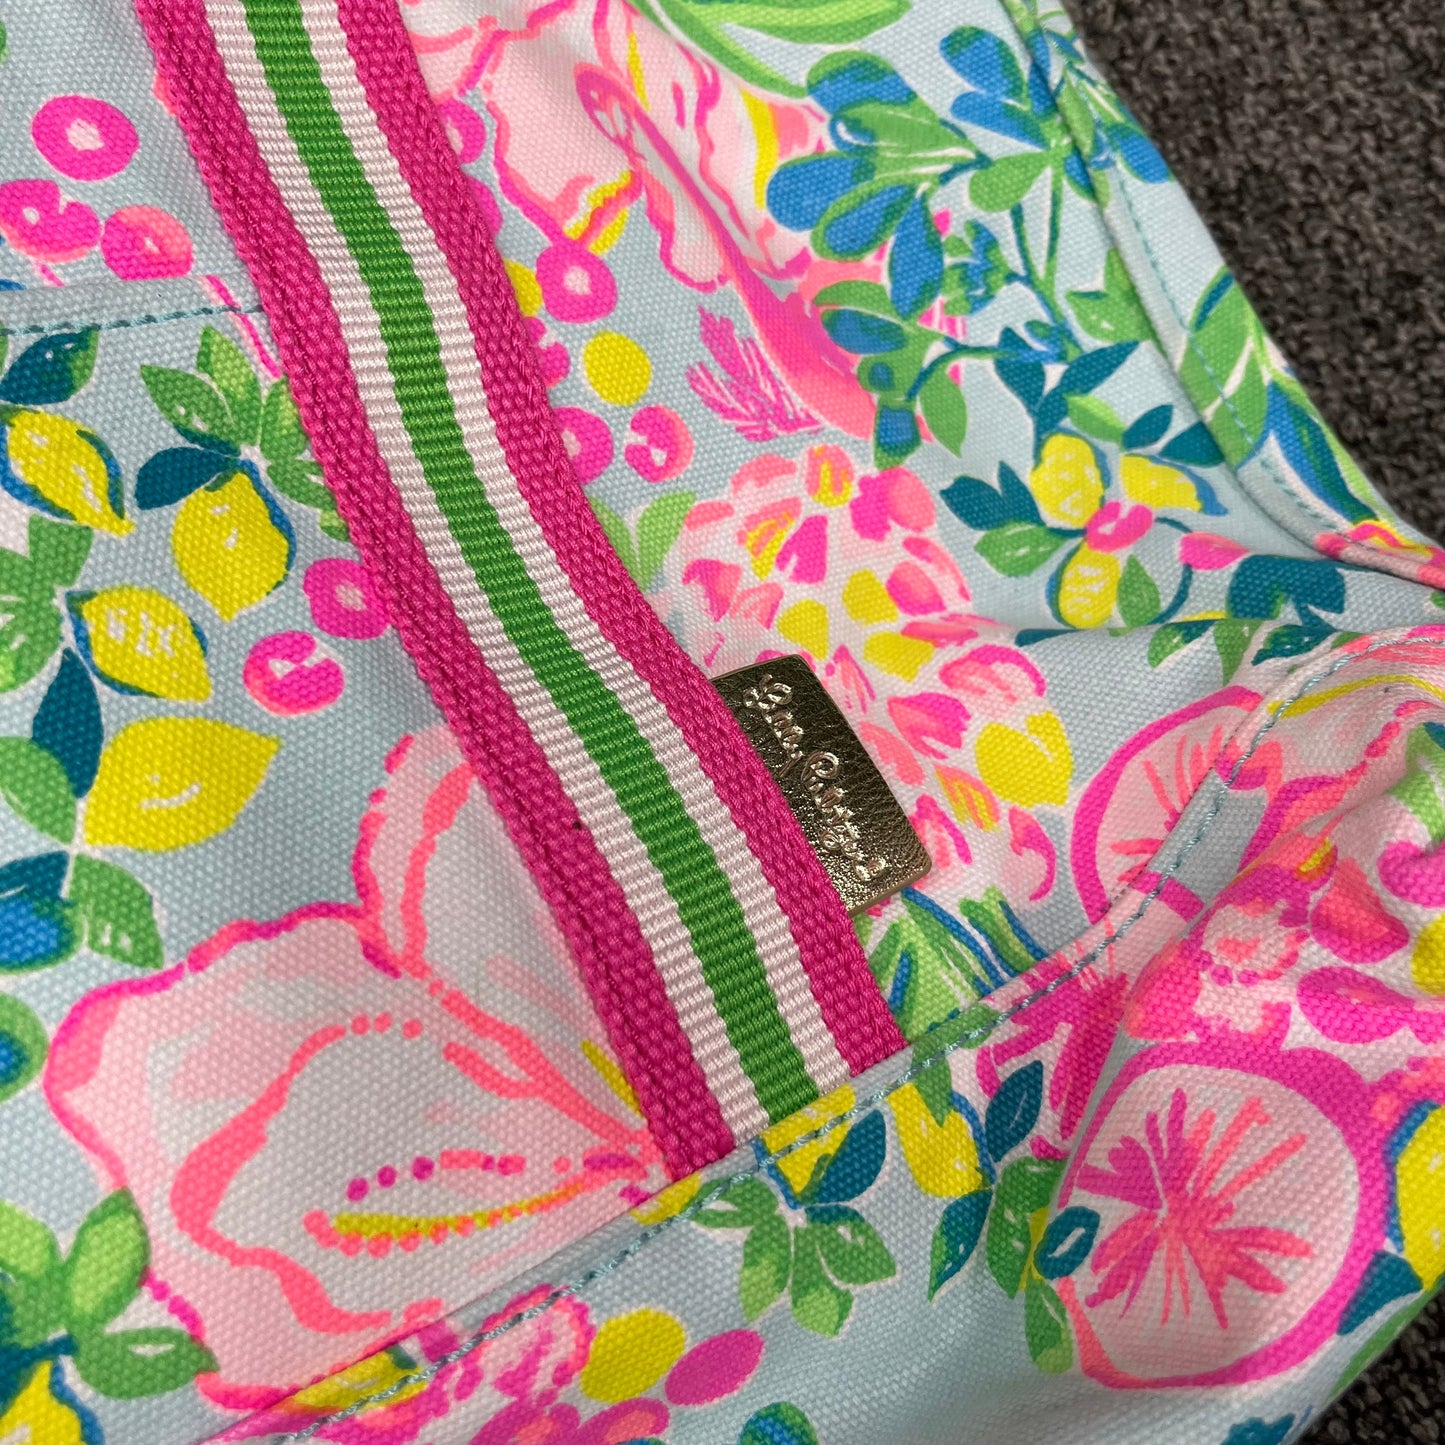 Tote Designer By Lilly Pulitzer NWT  Size: Medium